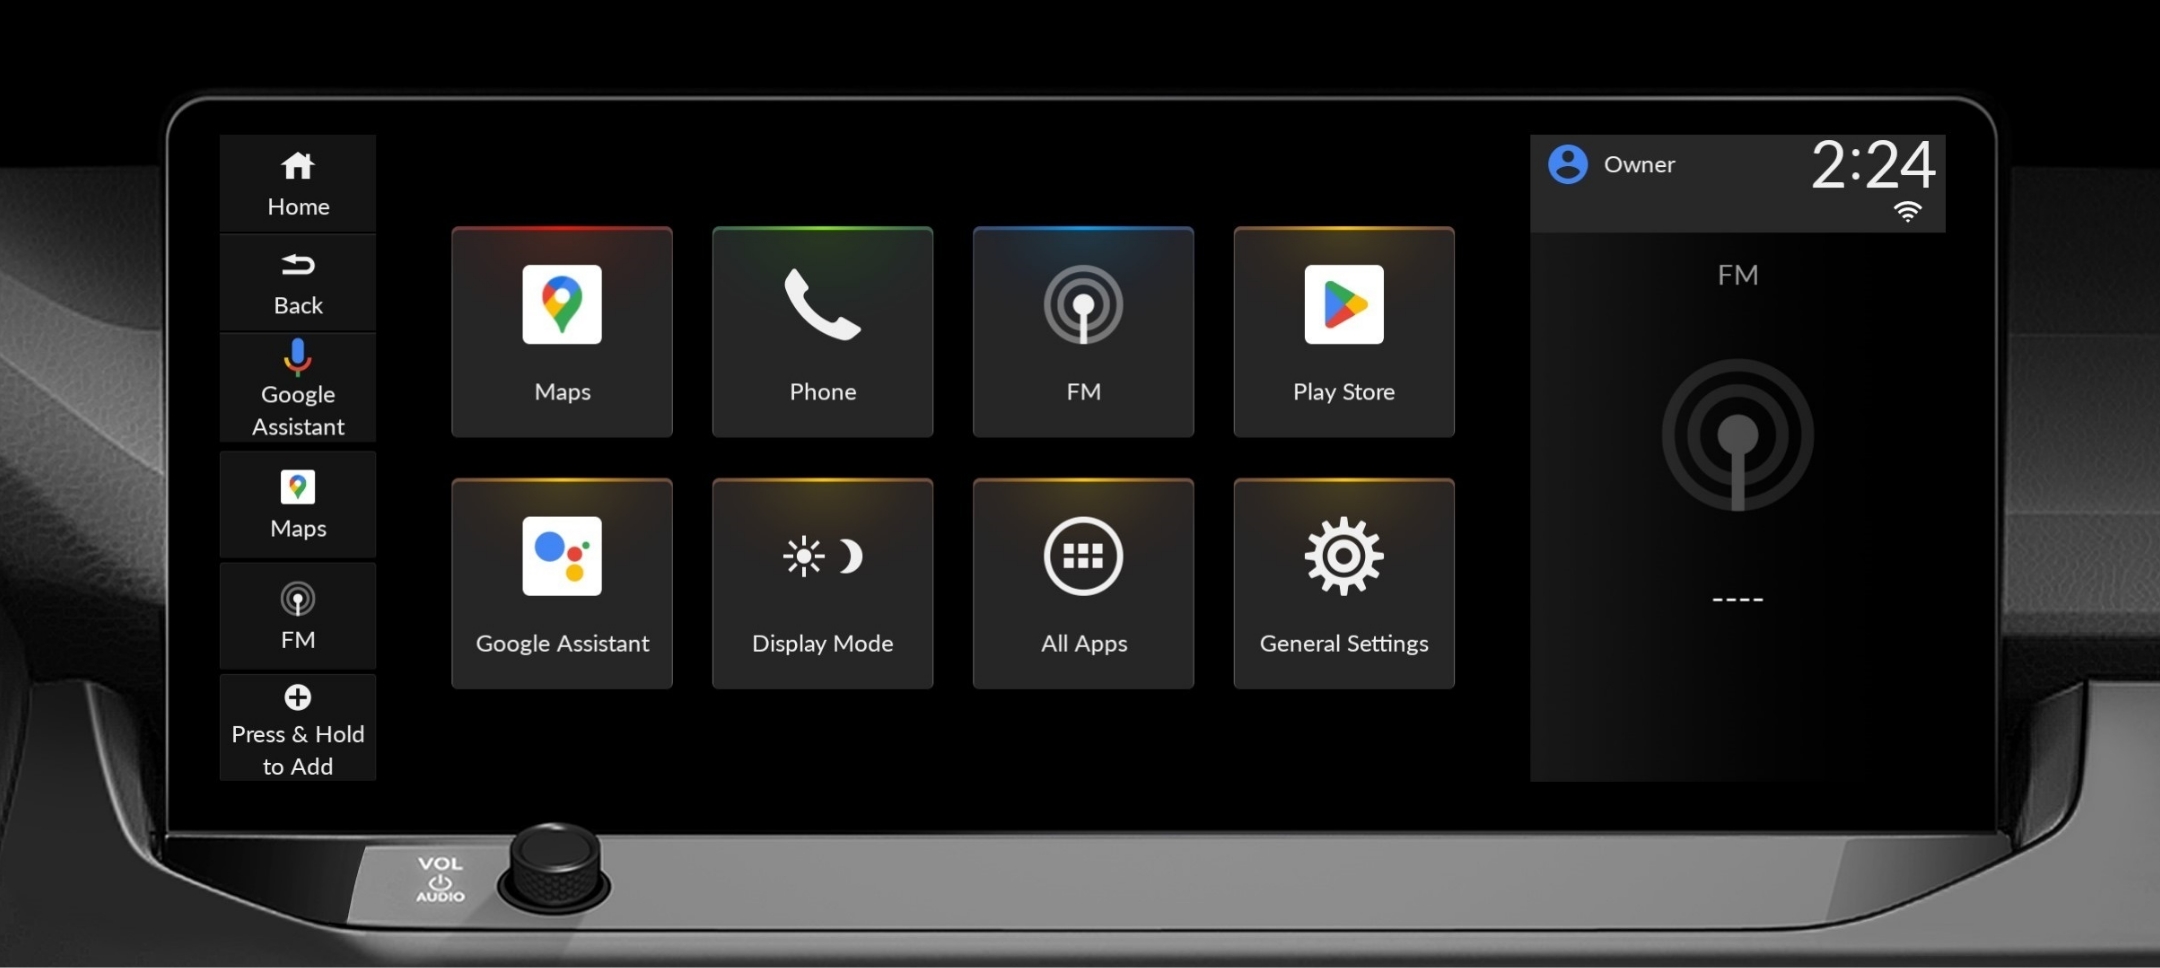 What you can do with the Honda Android Automotive OS Emulator